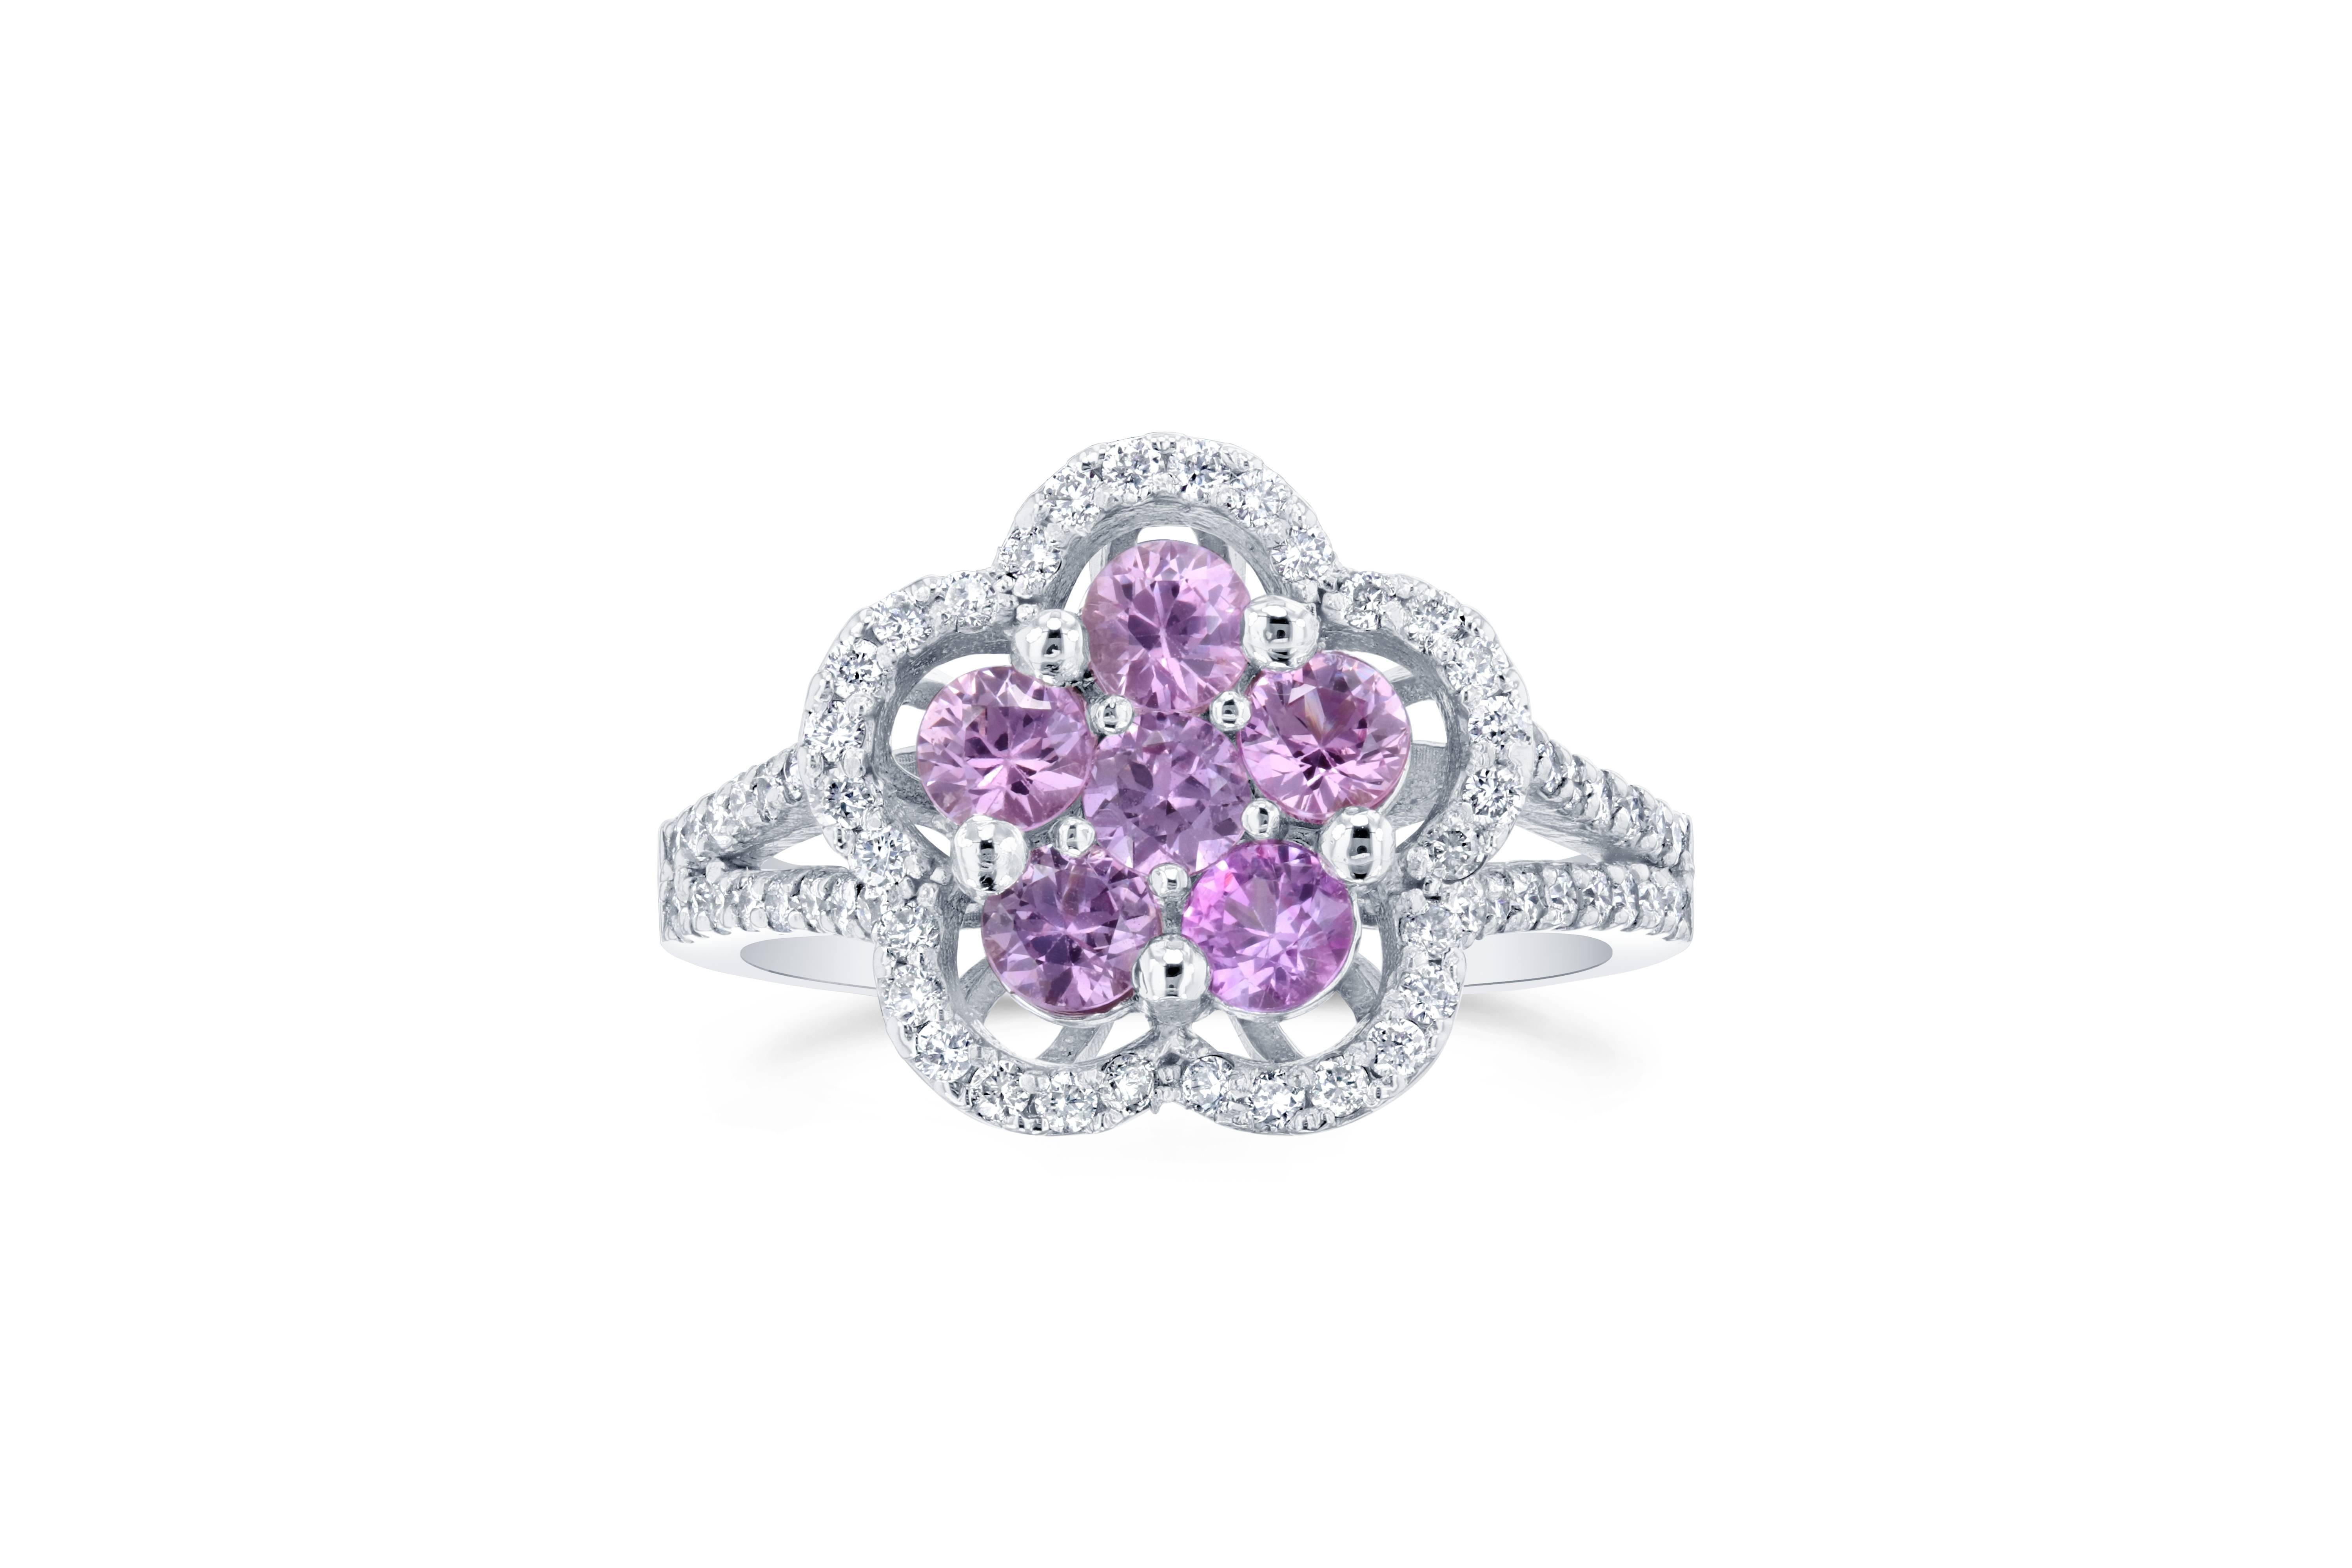 This ring has 6 Pink Sapphires in the center of the ring that weigh a total of 1.06 carats and is surrounded by 62 Round Brilliant Cut Diamonds that weigh a total of 0.45 carat. The total carat weight of the ring is 1.51 carats.

The ring is casted